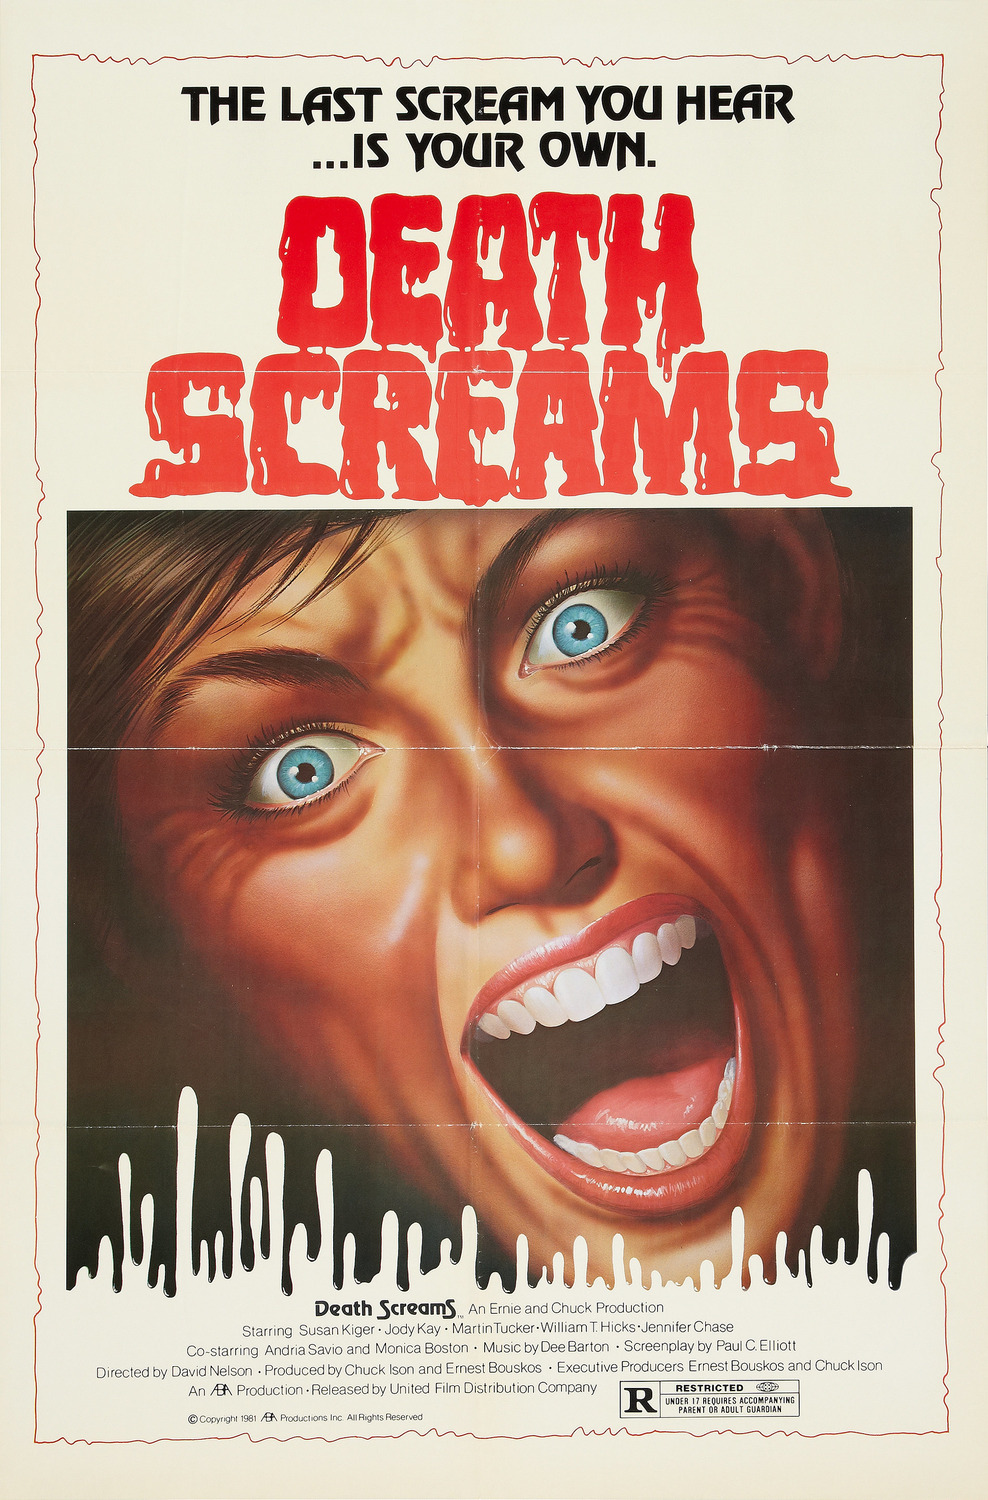 Extra Large Movie Poster Image for Death Screams 